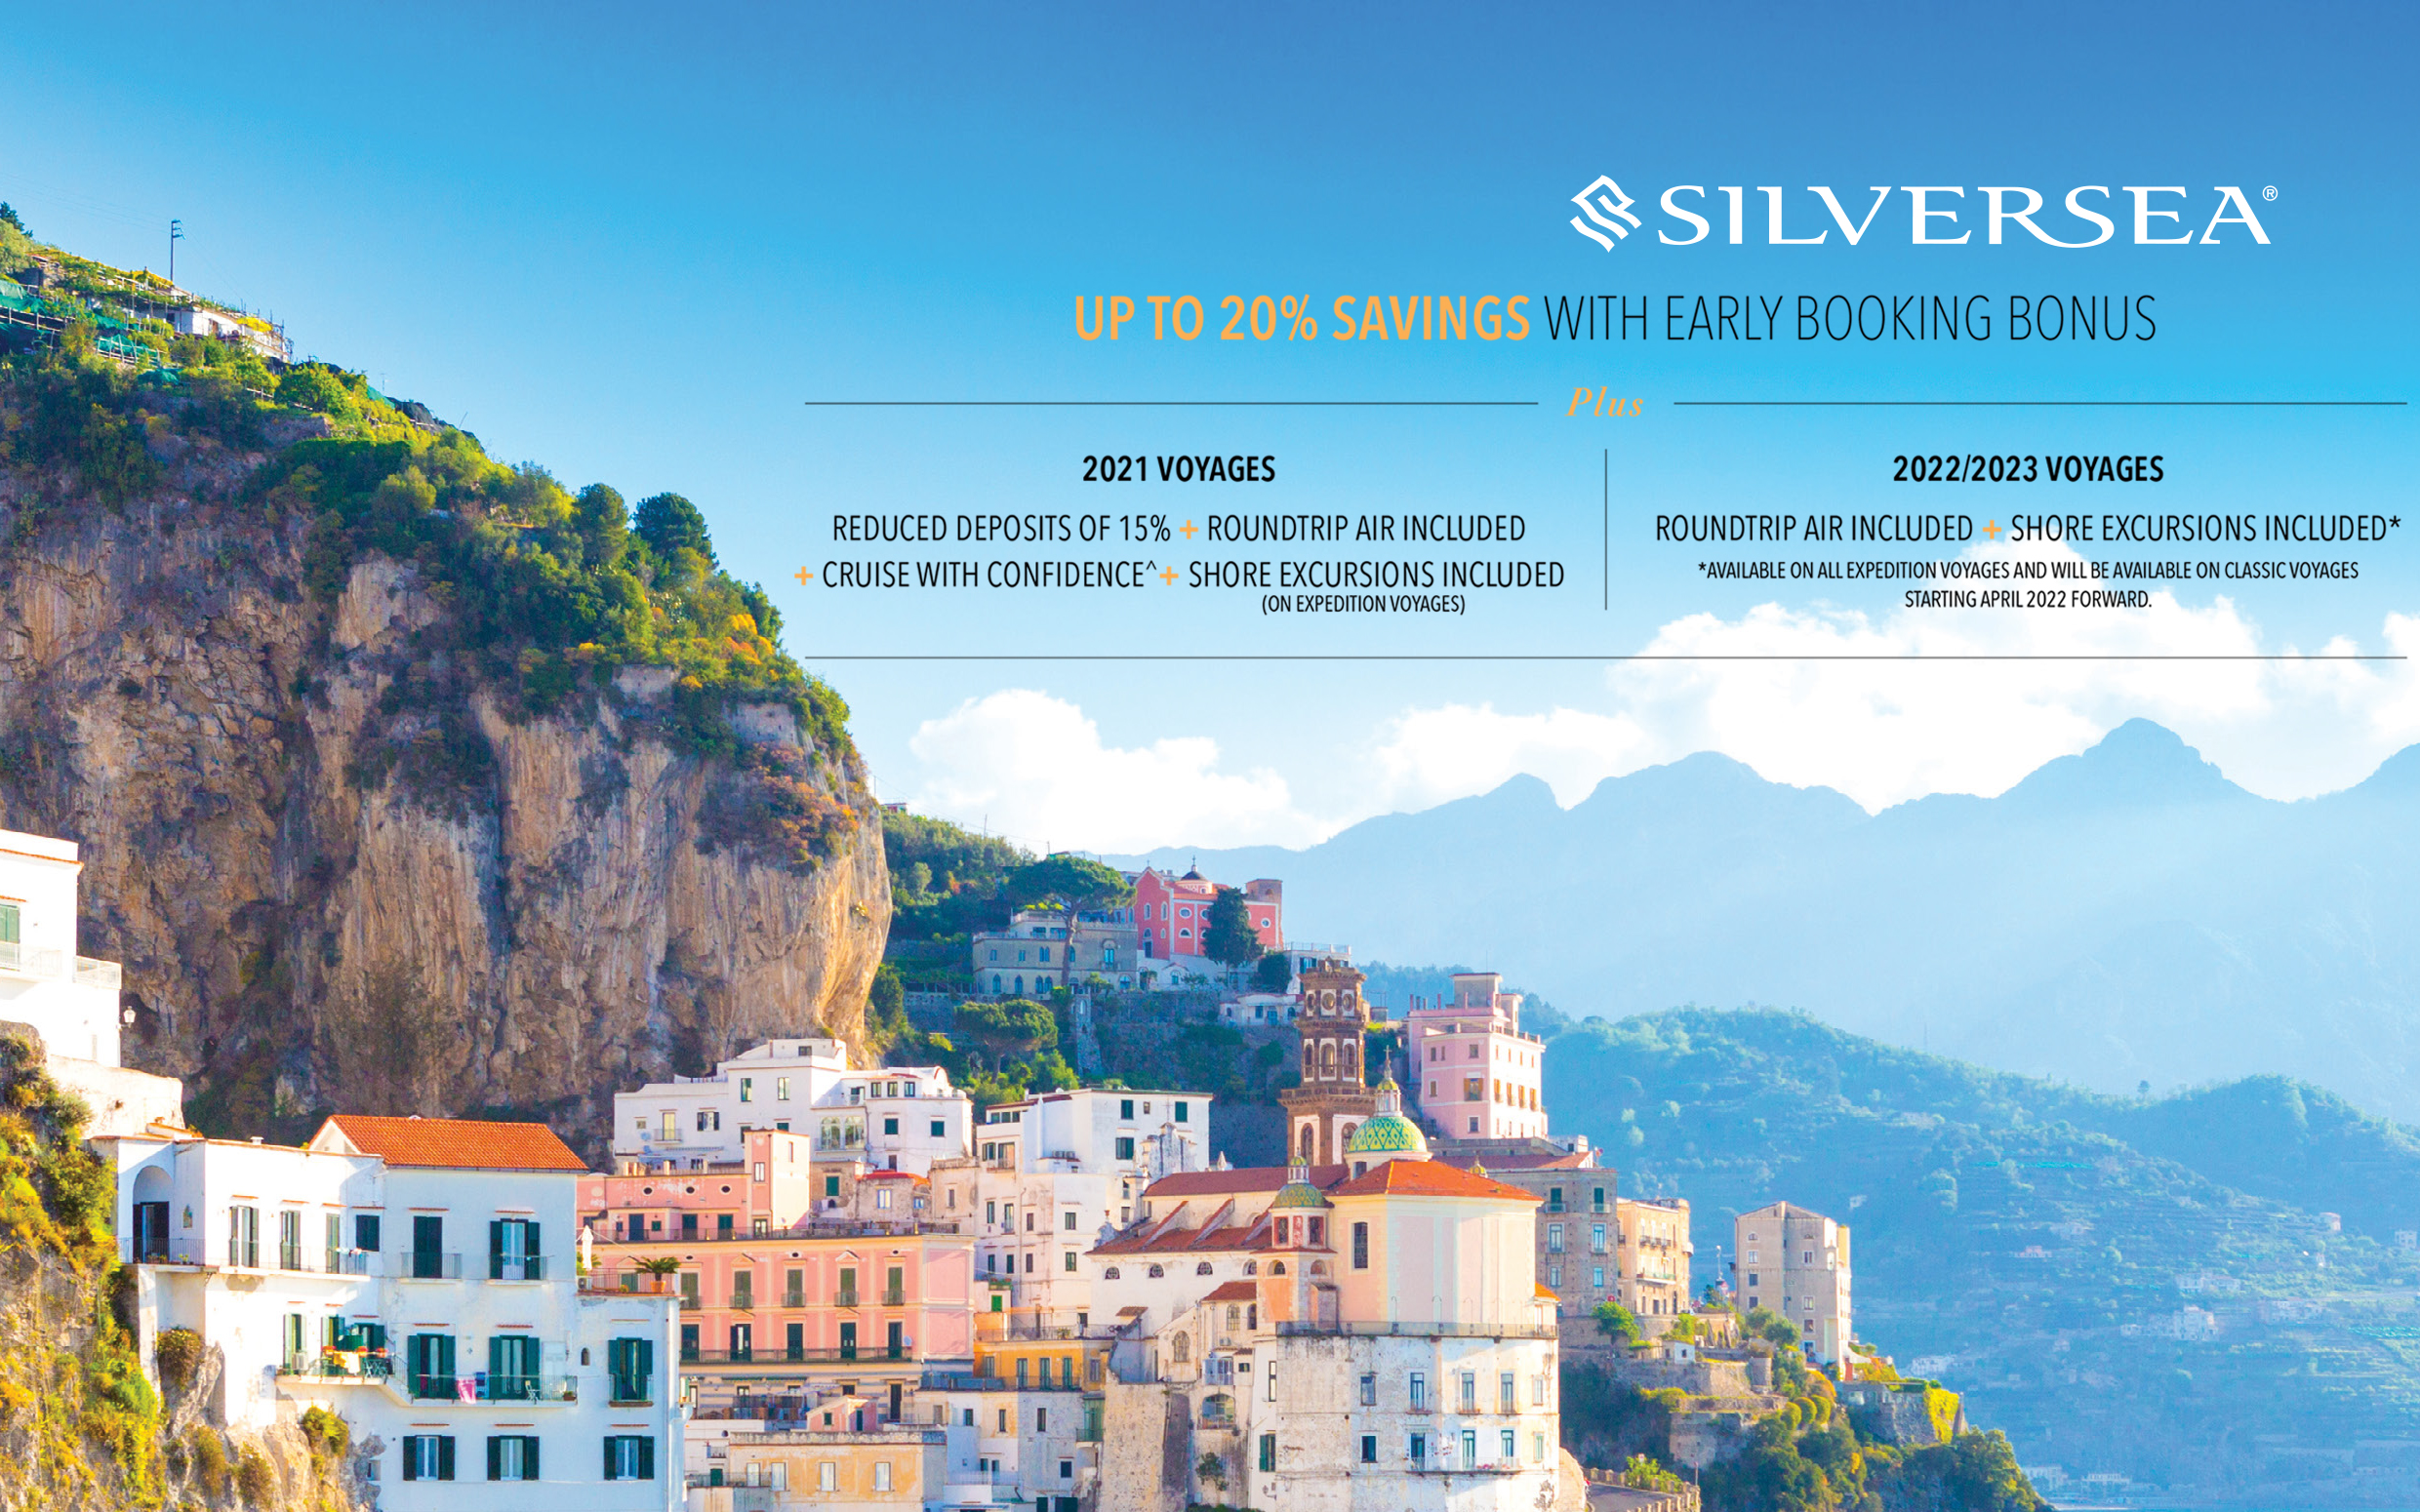 Silversea - Up to 20% Savings with Early Booking Bonus + Roundtrip Air* + Up to $600 Shipboard Credit